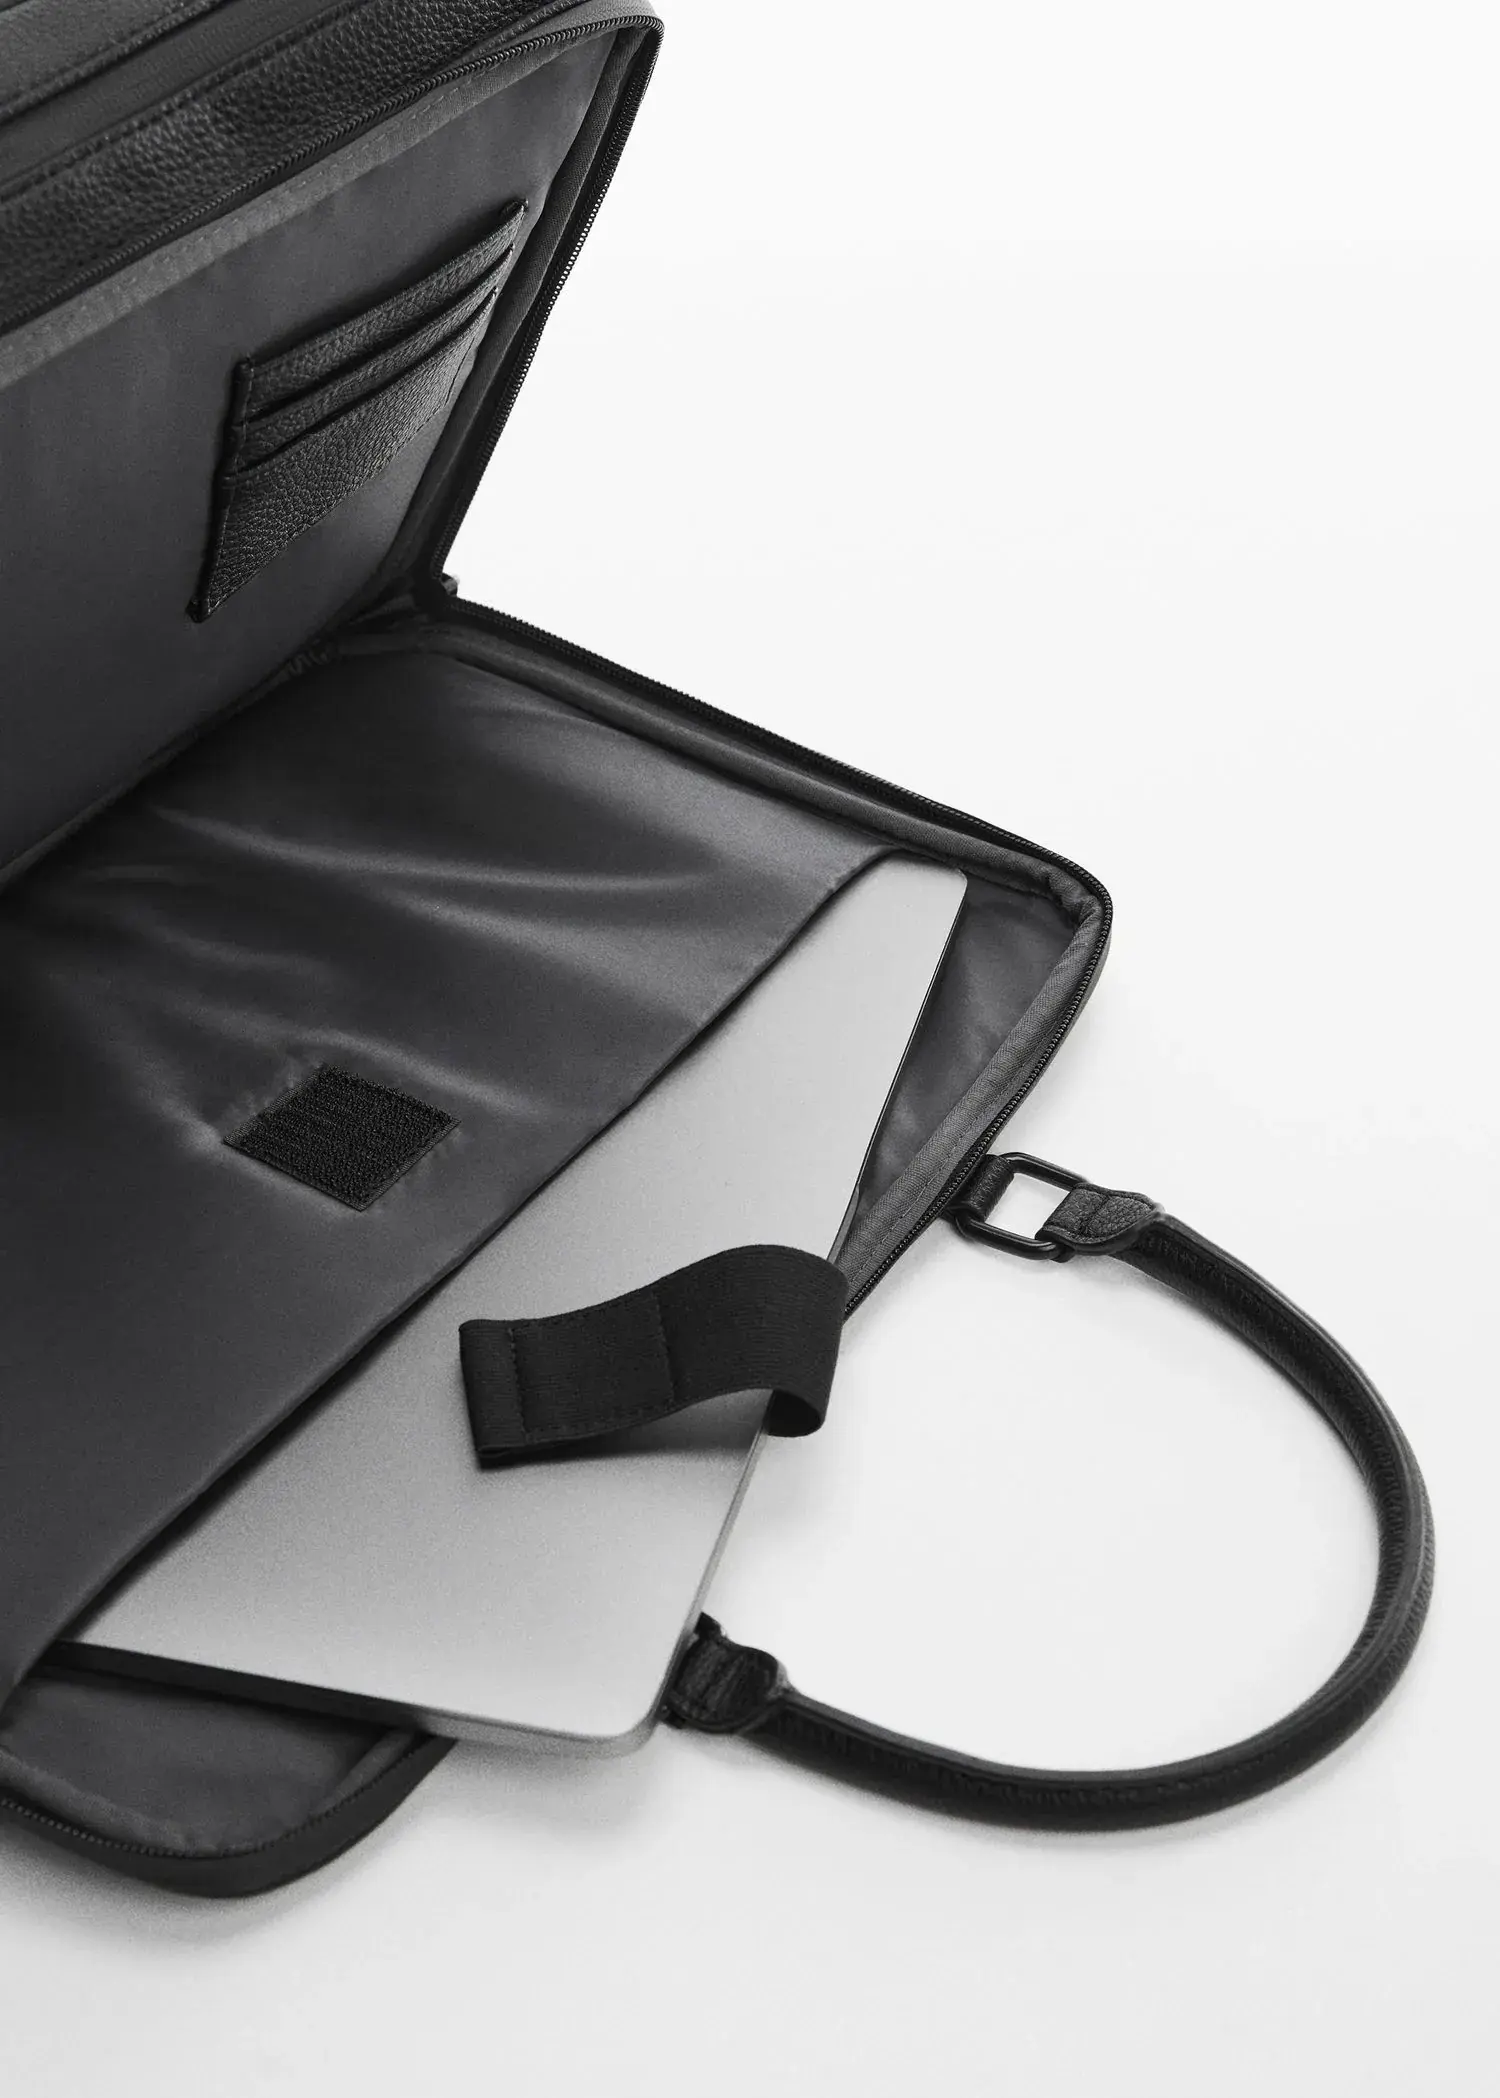 Mango Leather-effect briefcase. an open laptop case with a strap around the handle. 